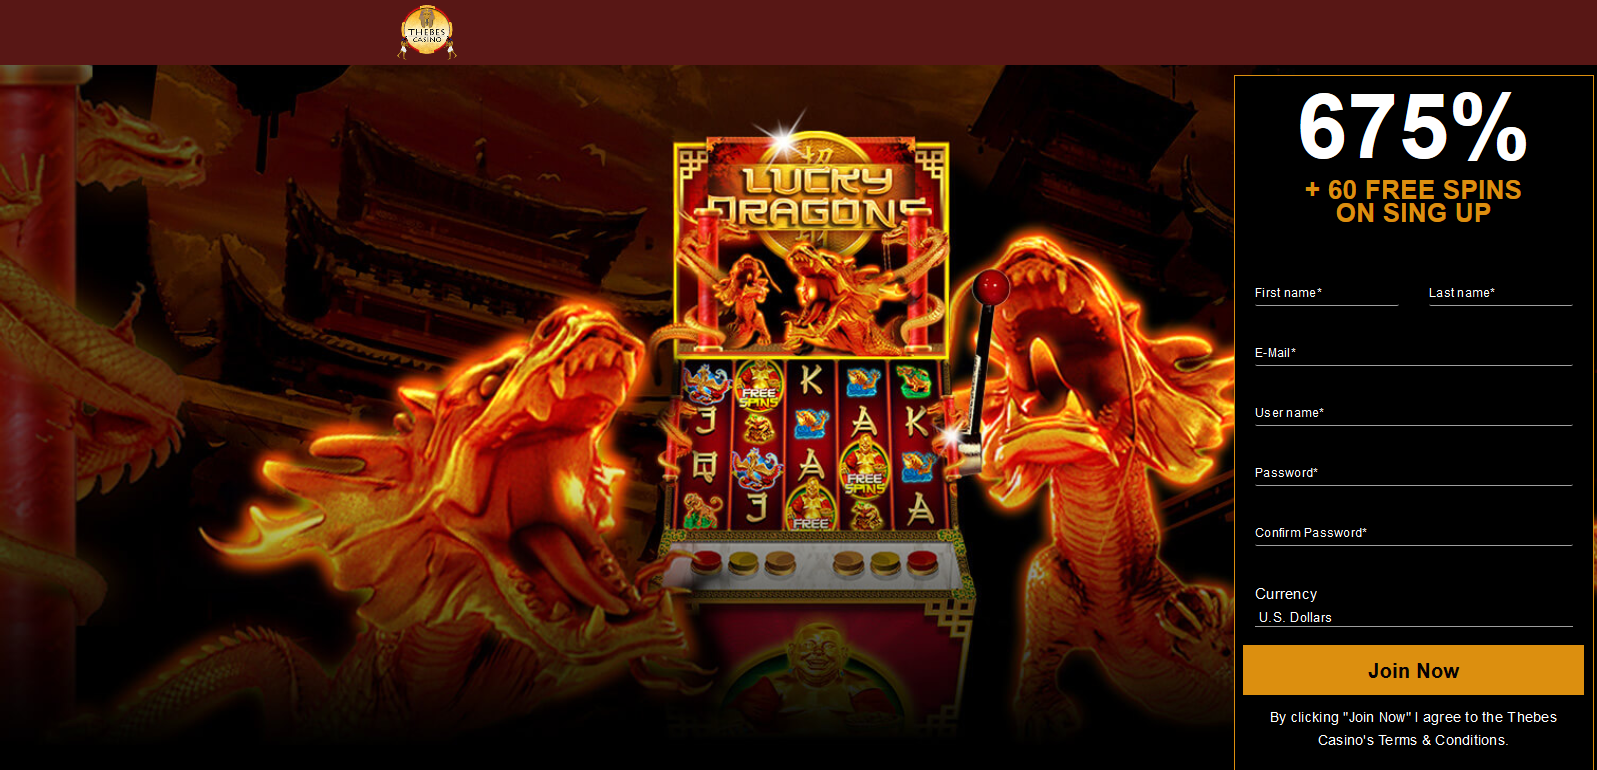 TheBes Casino - EN 675% + 60 free spins Lucky Dragons